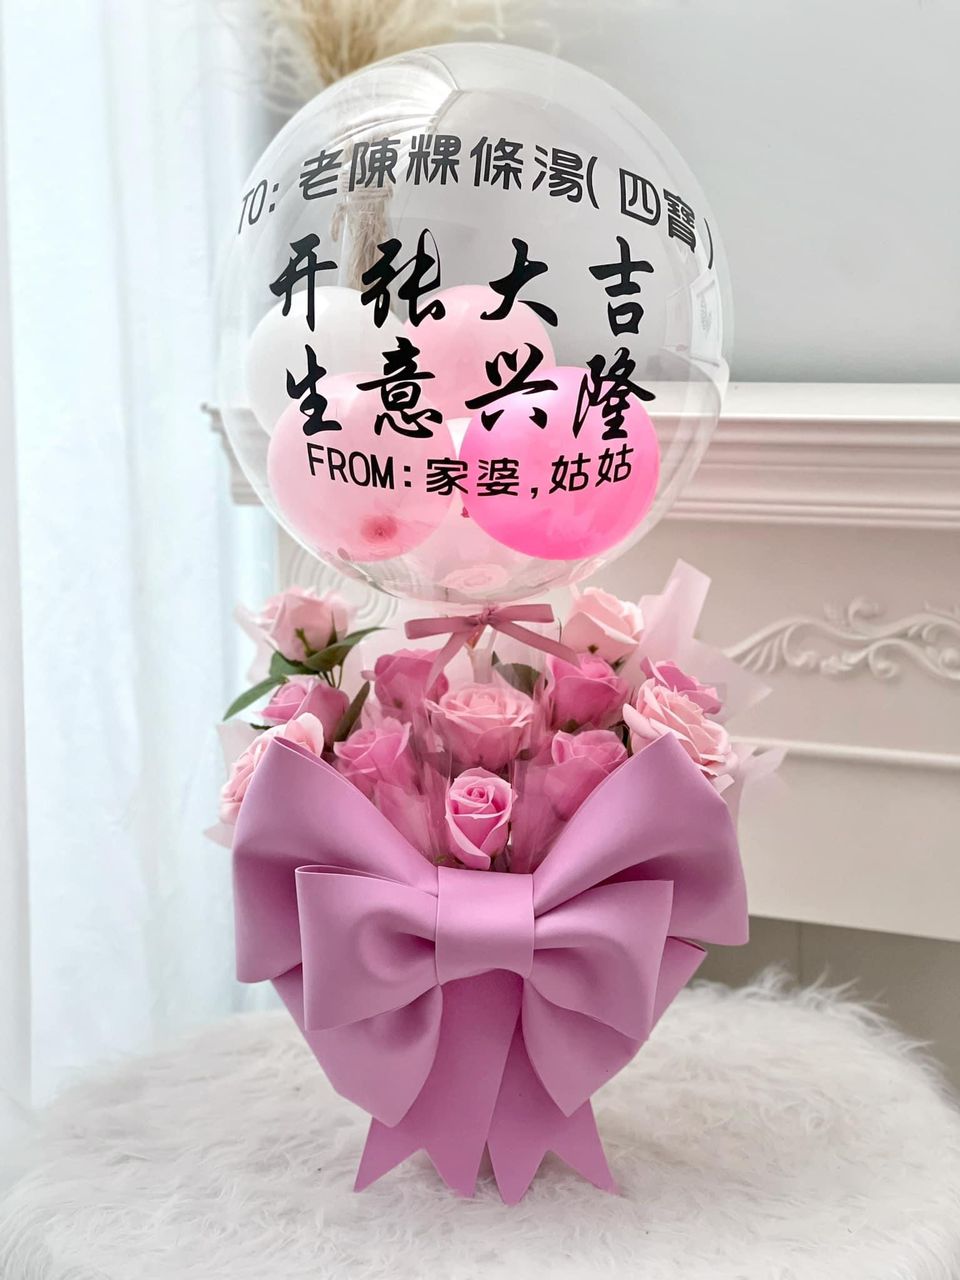 Grand Opening Flower box with ballon